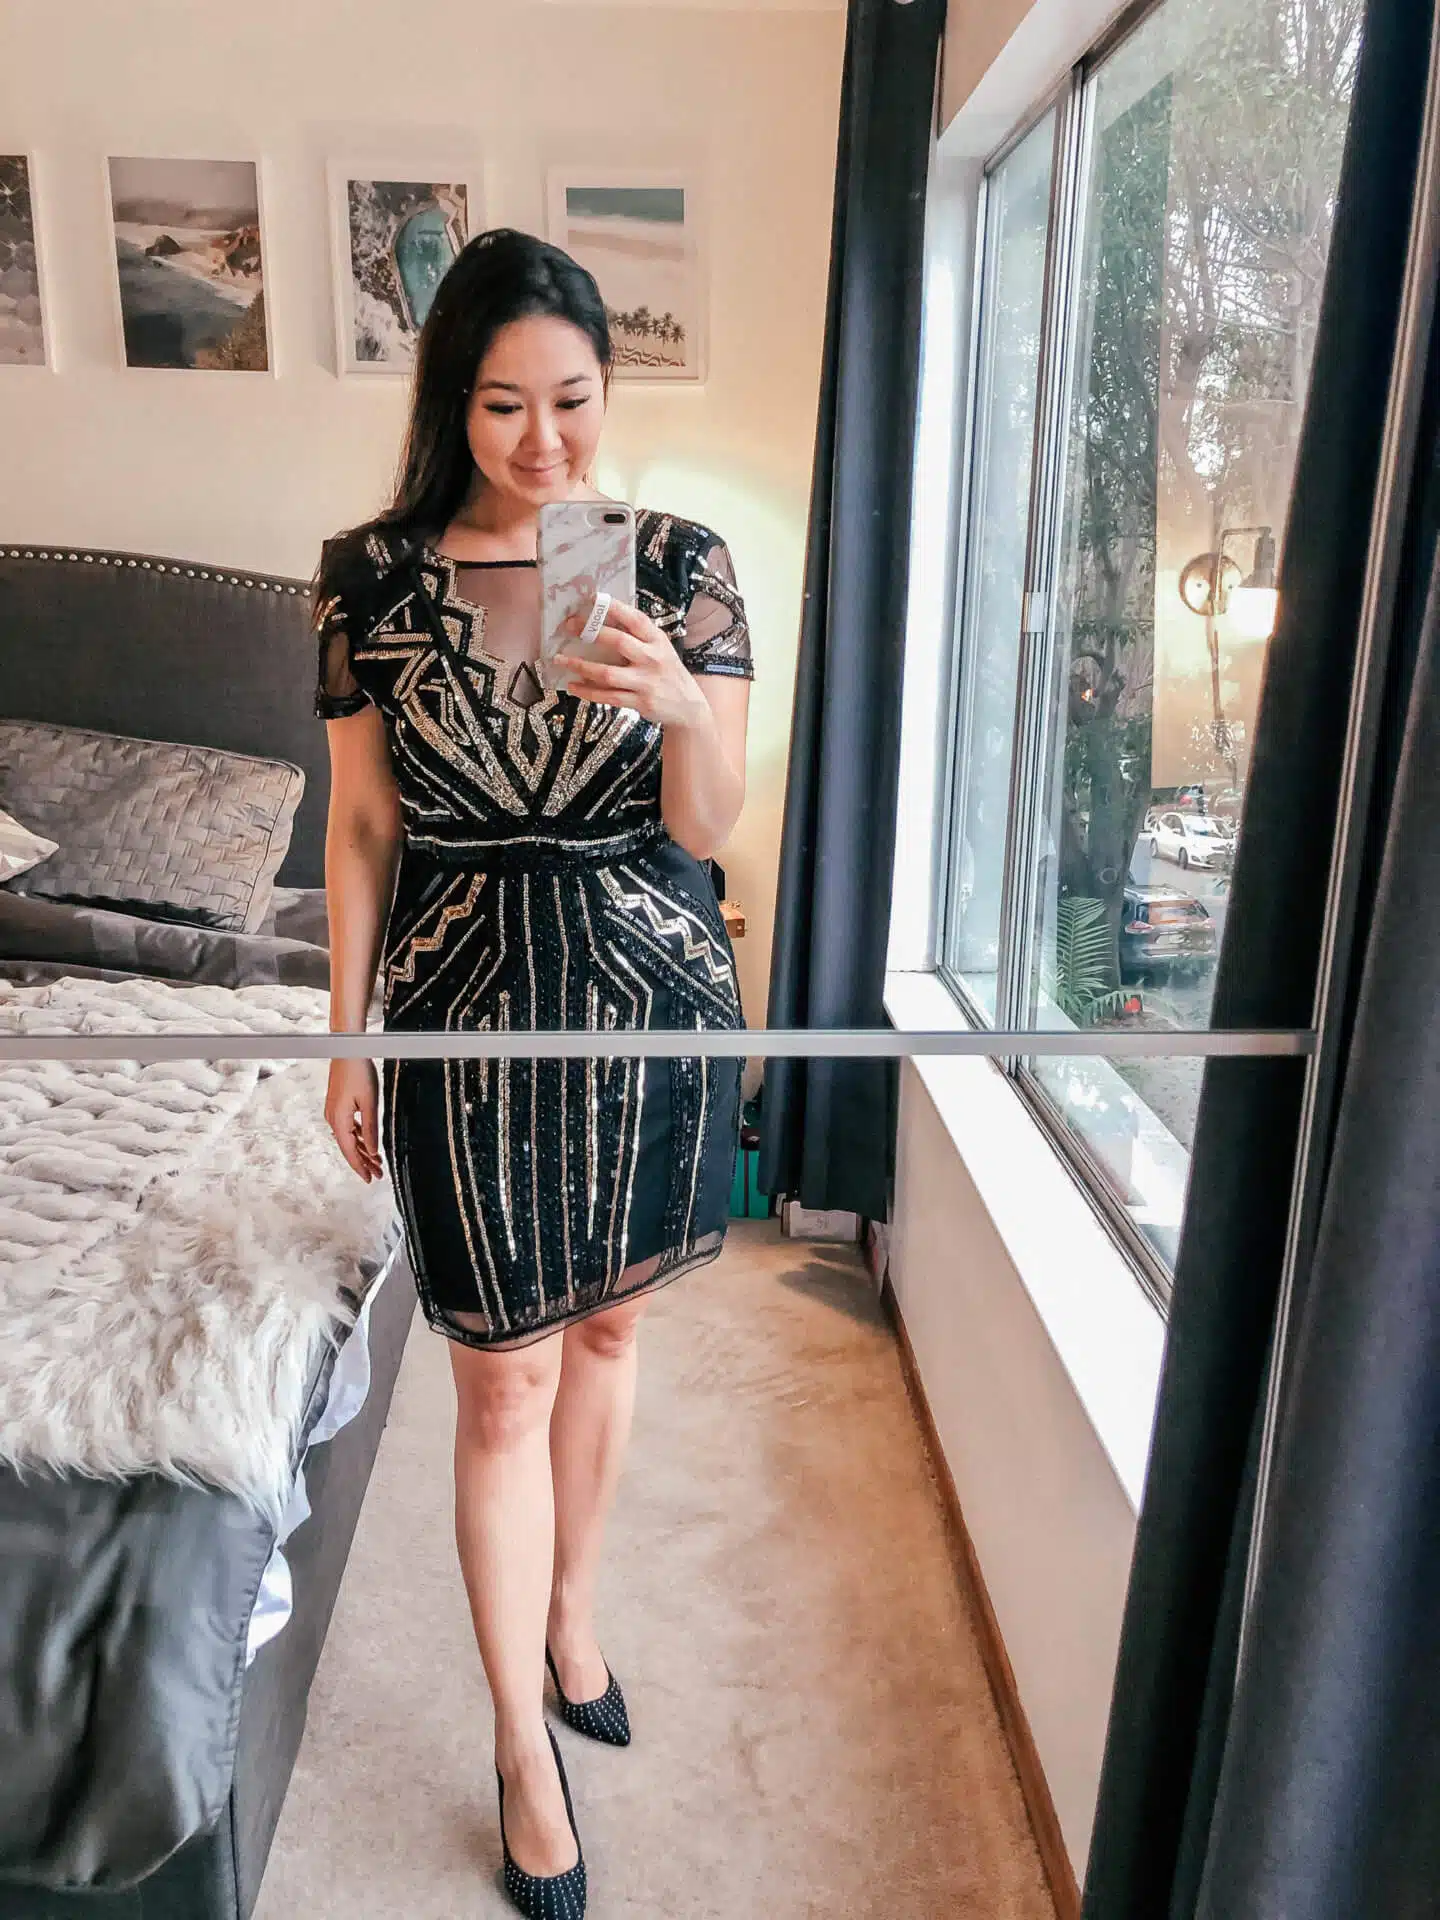 The best, cheap new years dresses that you can find on Amazon